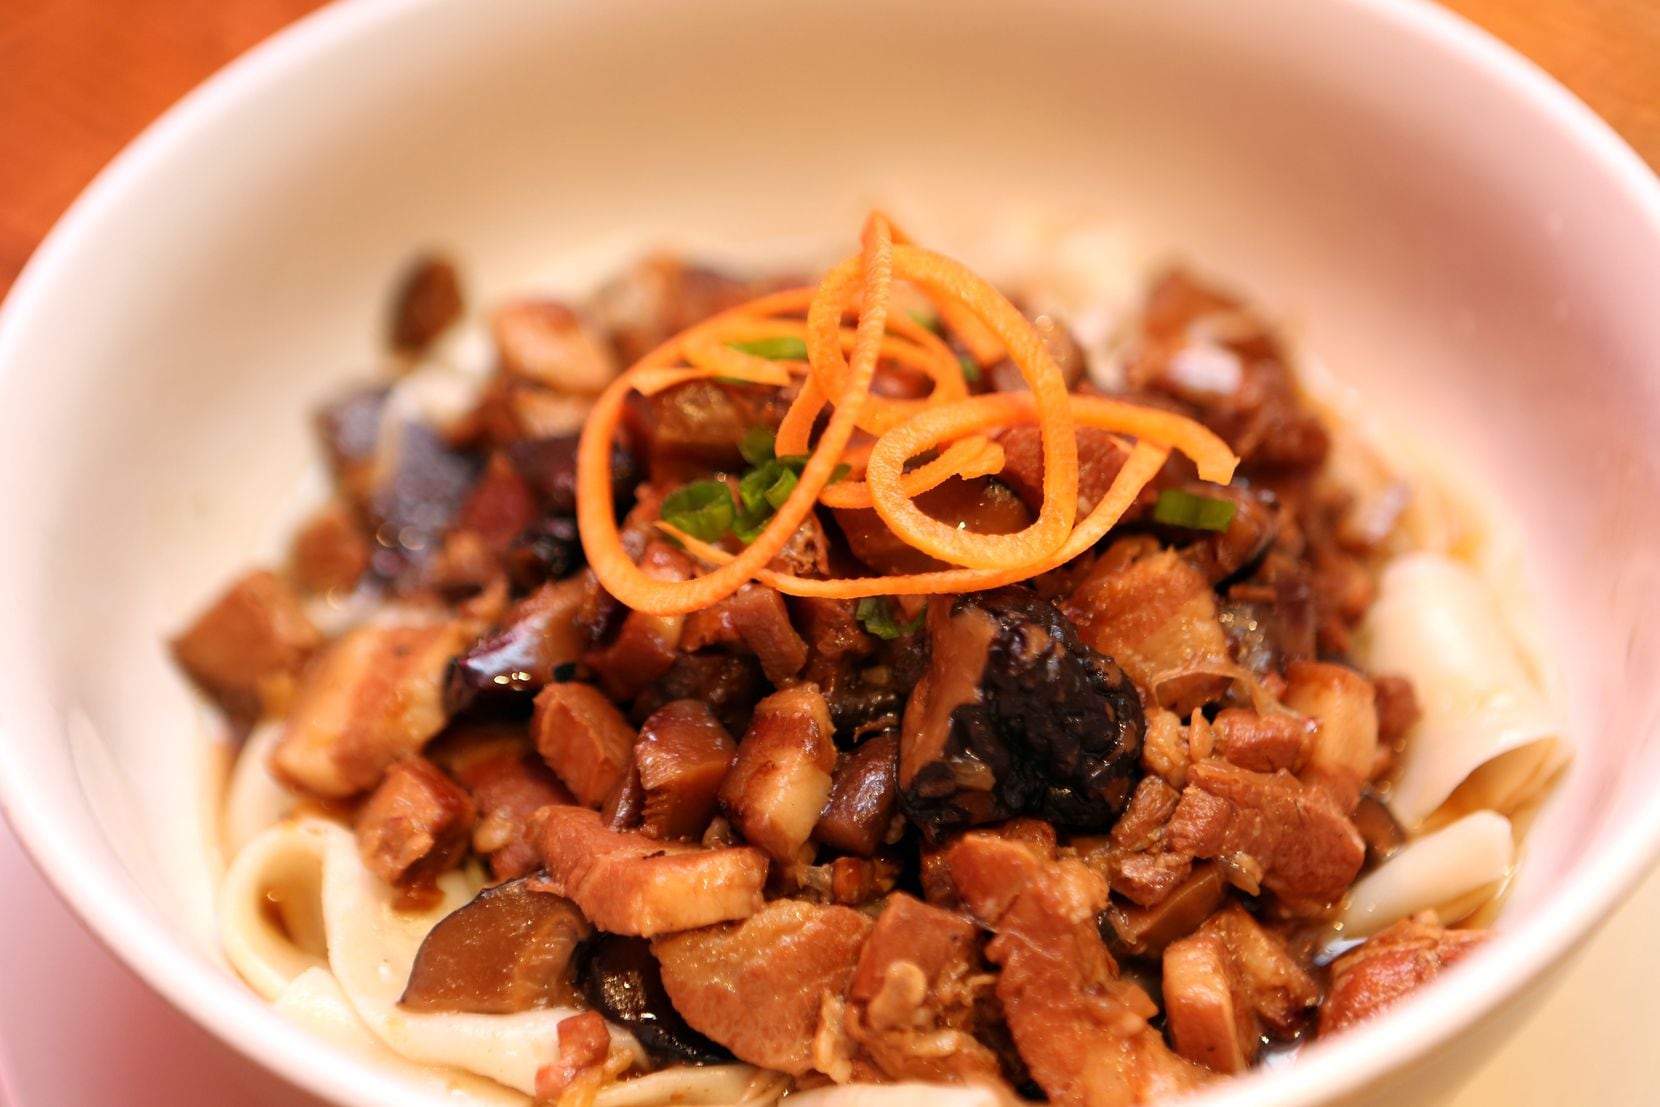 Henan cuisine hails from a region in central China and is not to be confused with Hunan, a...